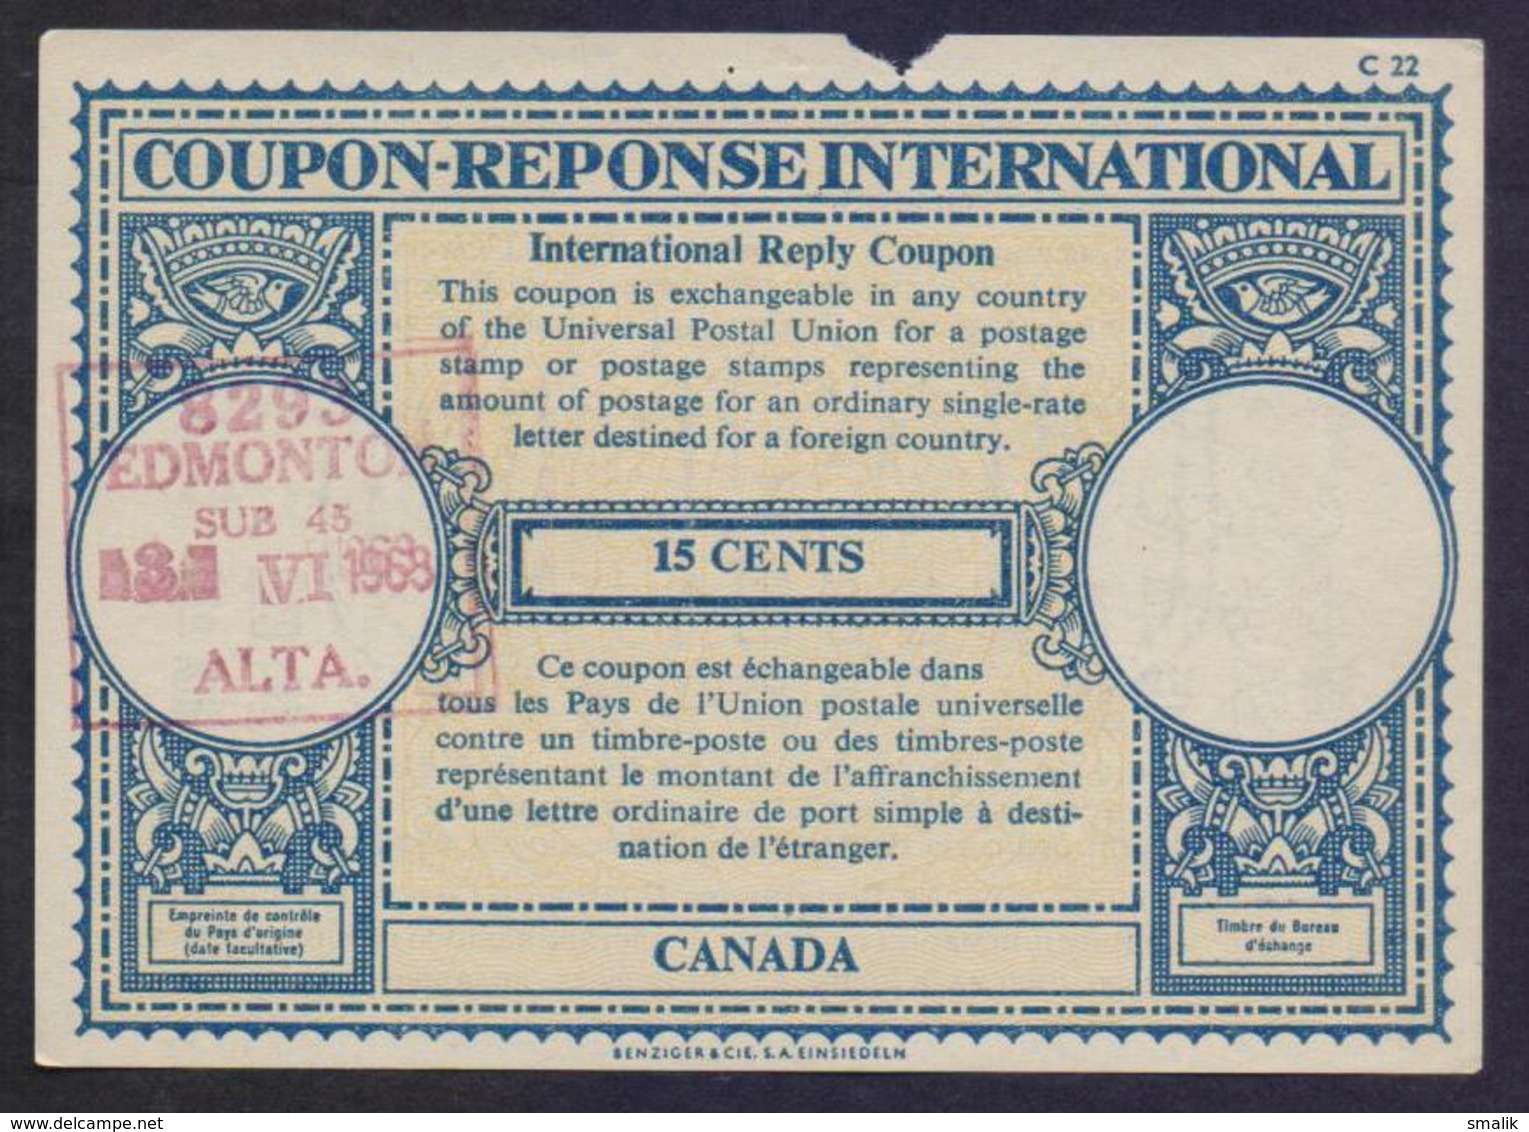 CANADA - 15 Cents London Type IRC COUPON REPONSE INTERNATIONAL REPLY, UPU, Cancelled 3.6.1968, Minor Broken - Reply Coupons